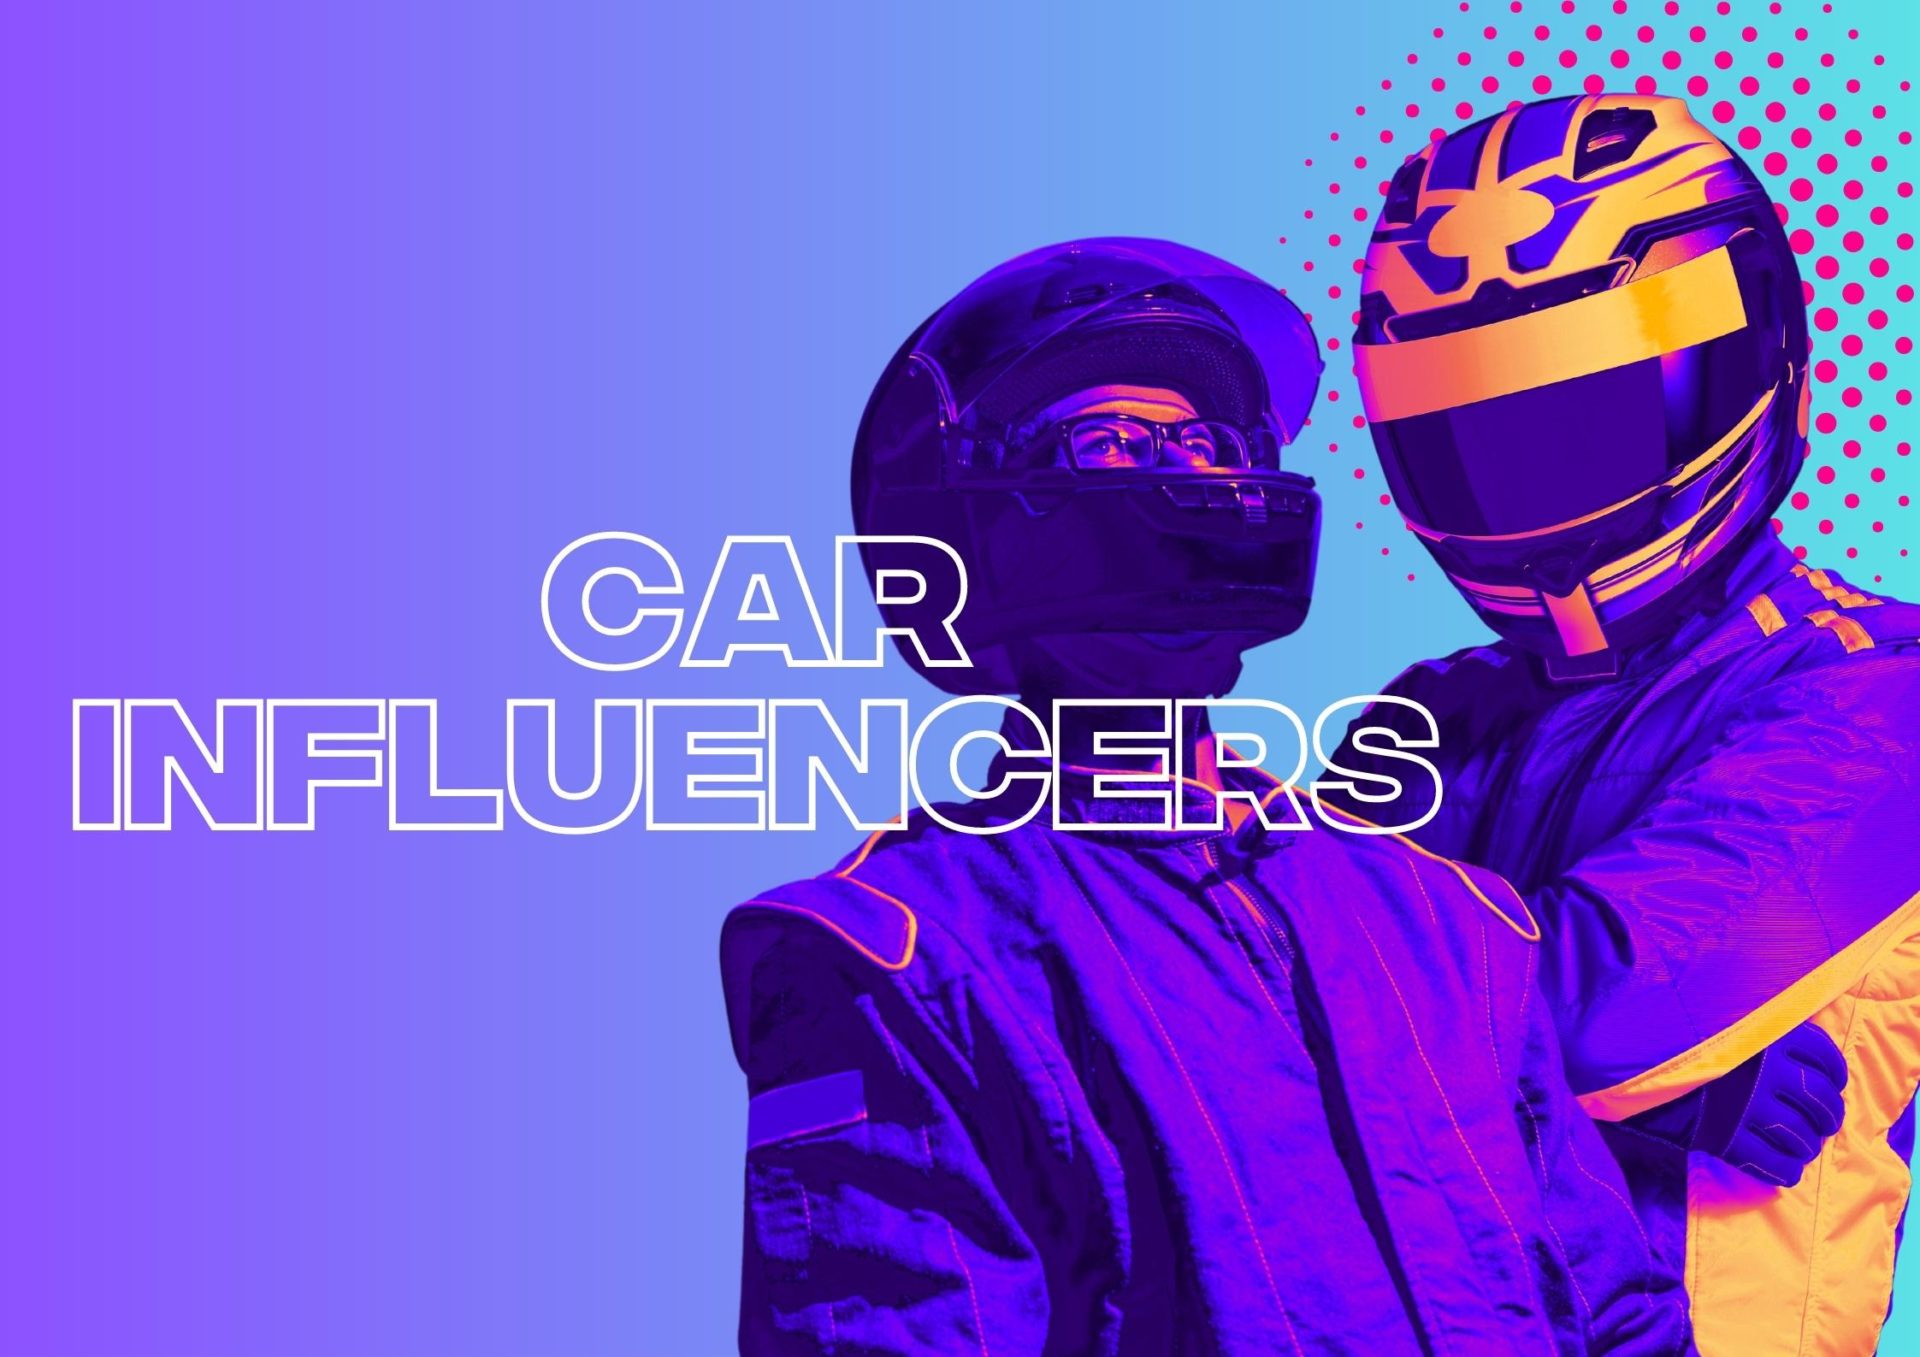 Fuel Your Need For Speed With The Top 20 Car Influencers on Instagram